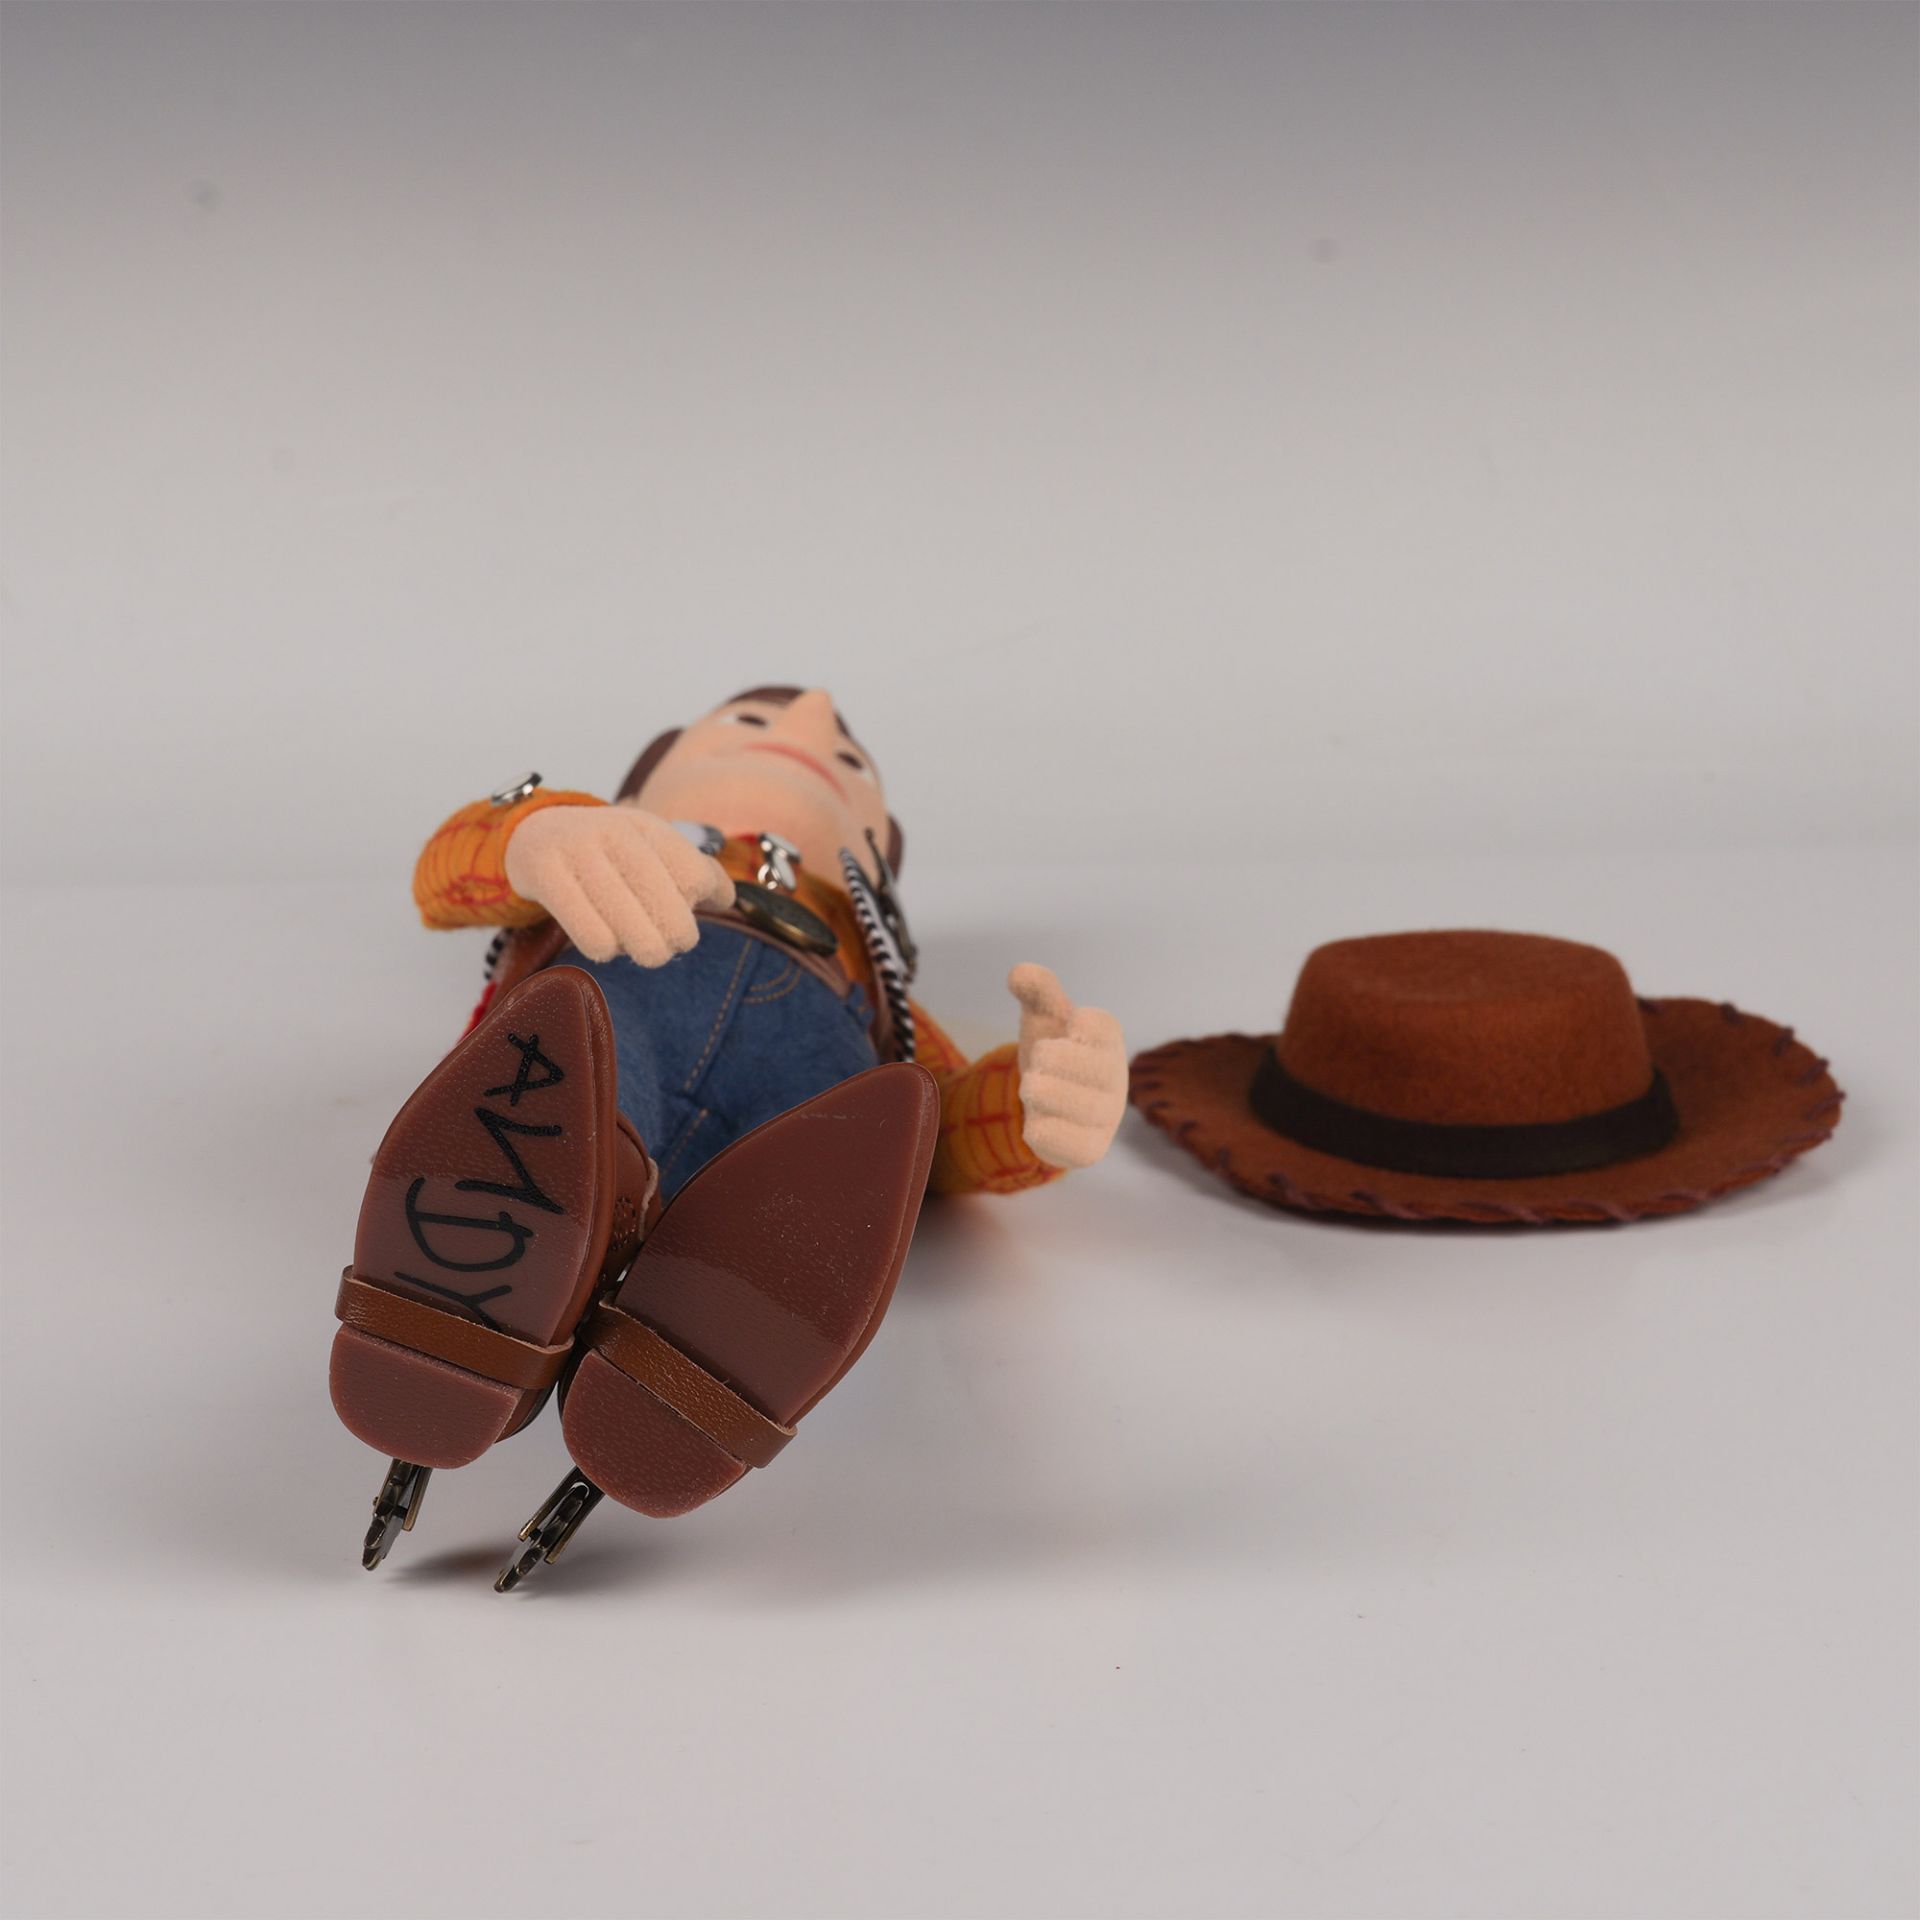 Steiff Character, Woody from Disney/Pixar's Toy Story - Image 8 of 12